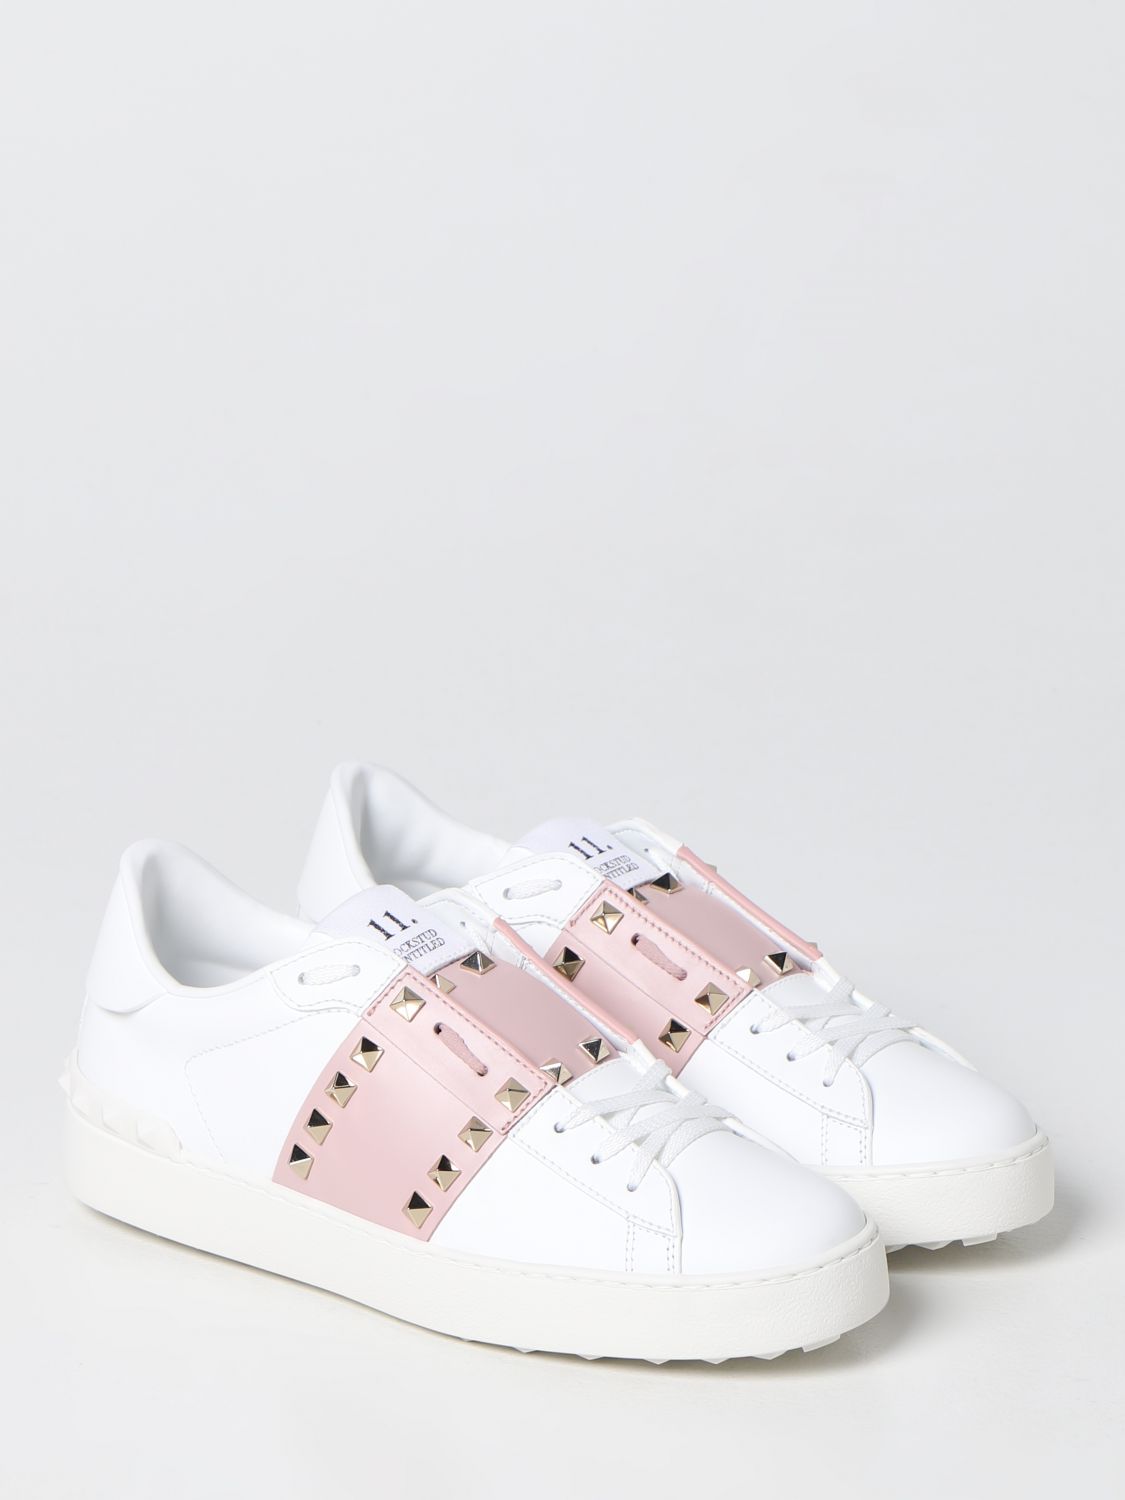 gruppe frugter Lab VALENTINO GARAVANI: Rockstud Untitled 11 leather sneakers - White |  Valentino Garavani sneakers 1W2S0A01ZTN online at GIGLIO.COM